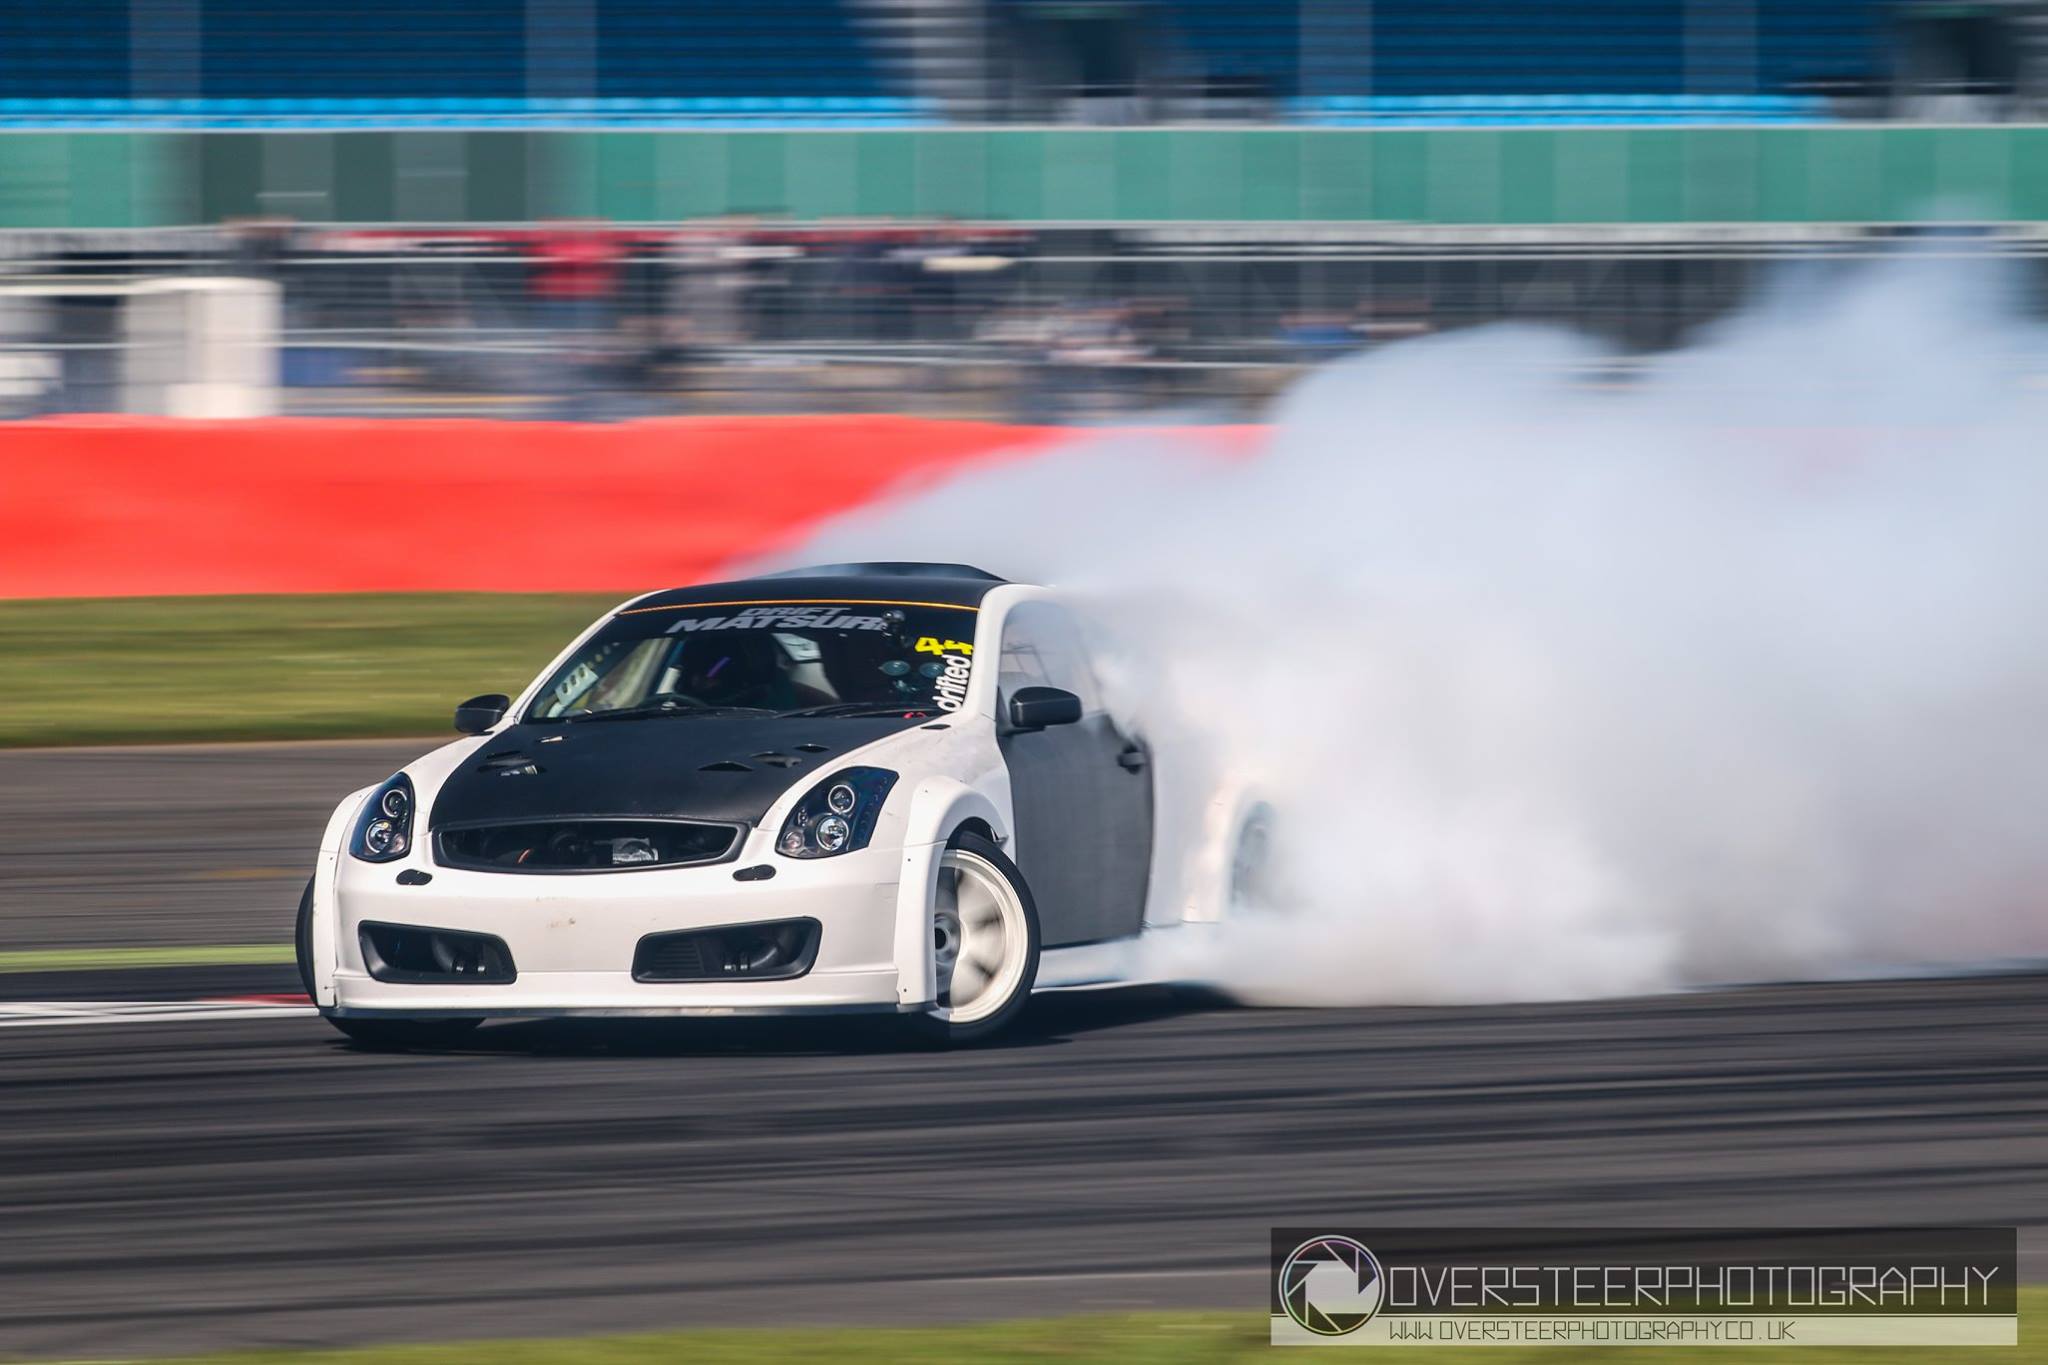 Paul Cheshire in the G35